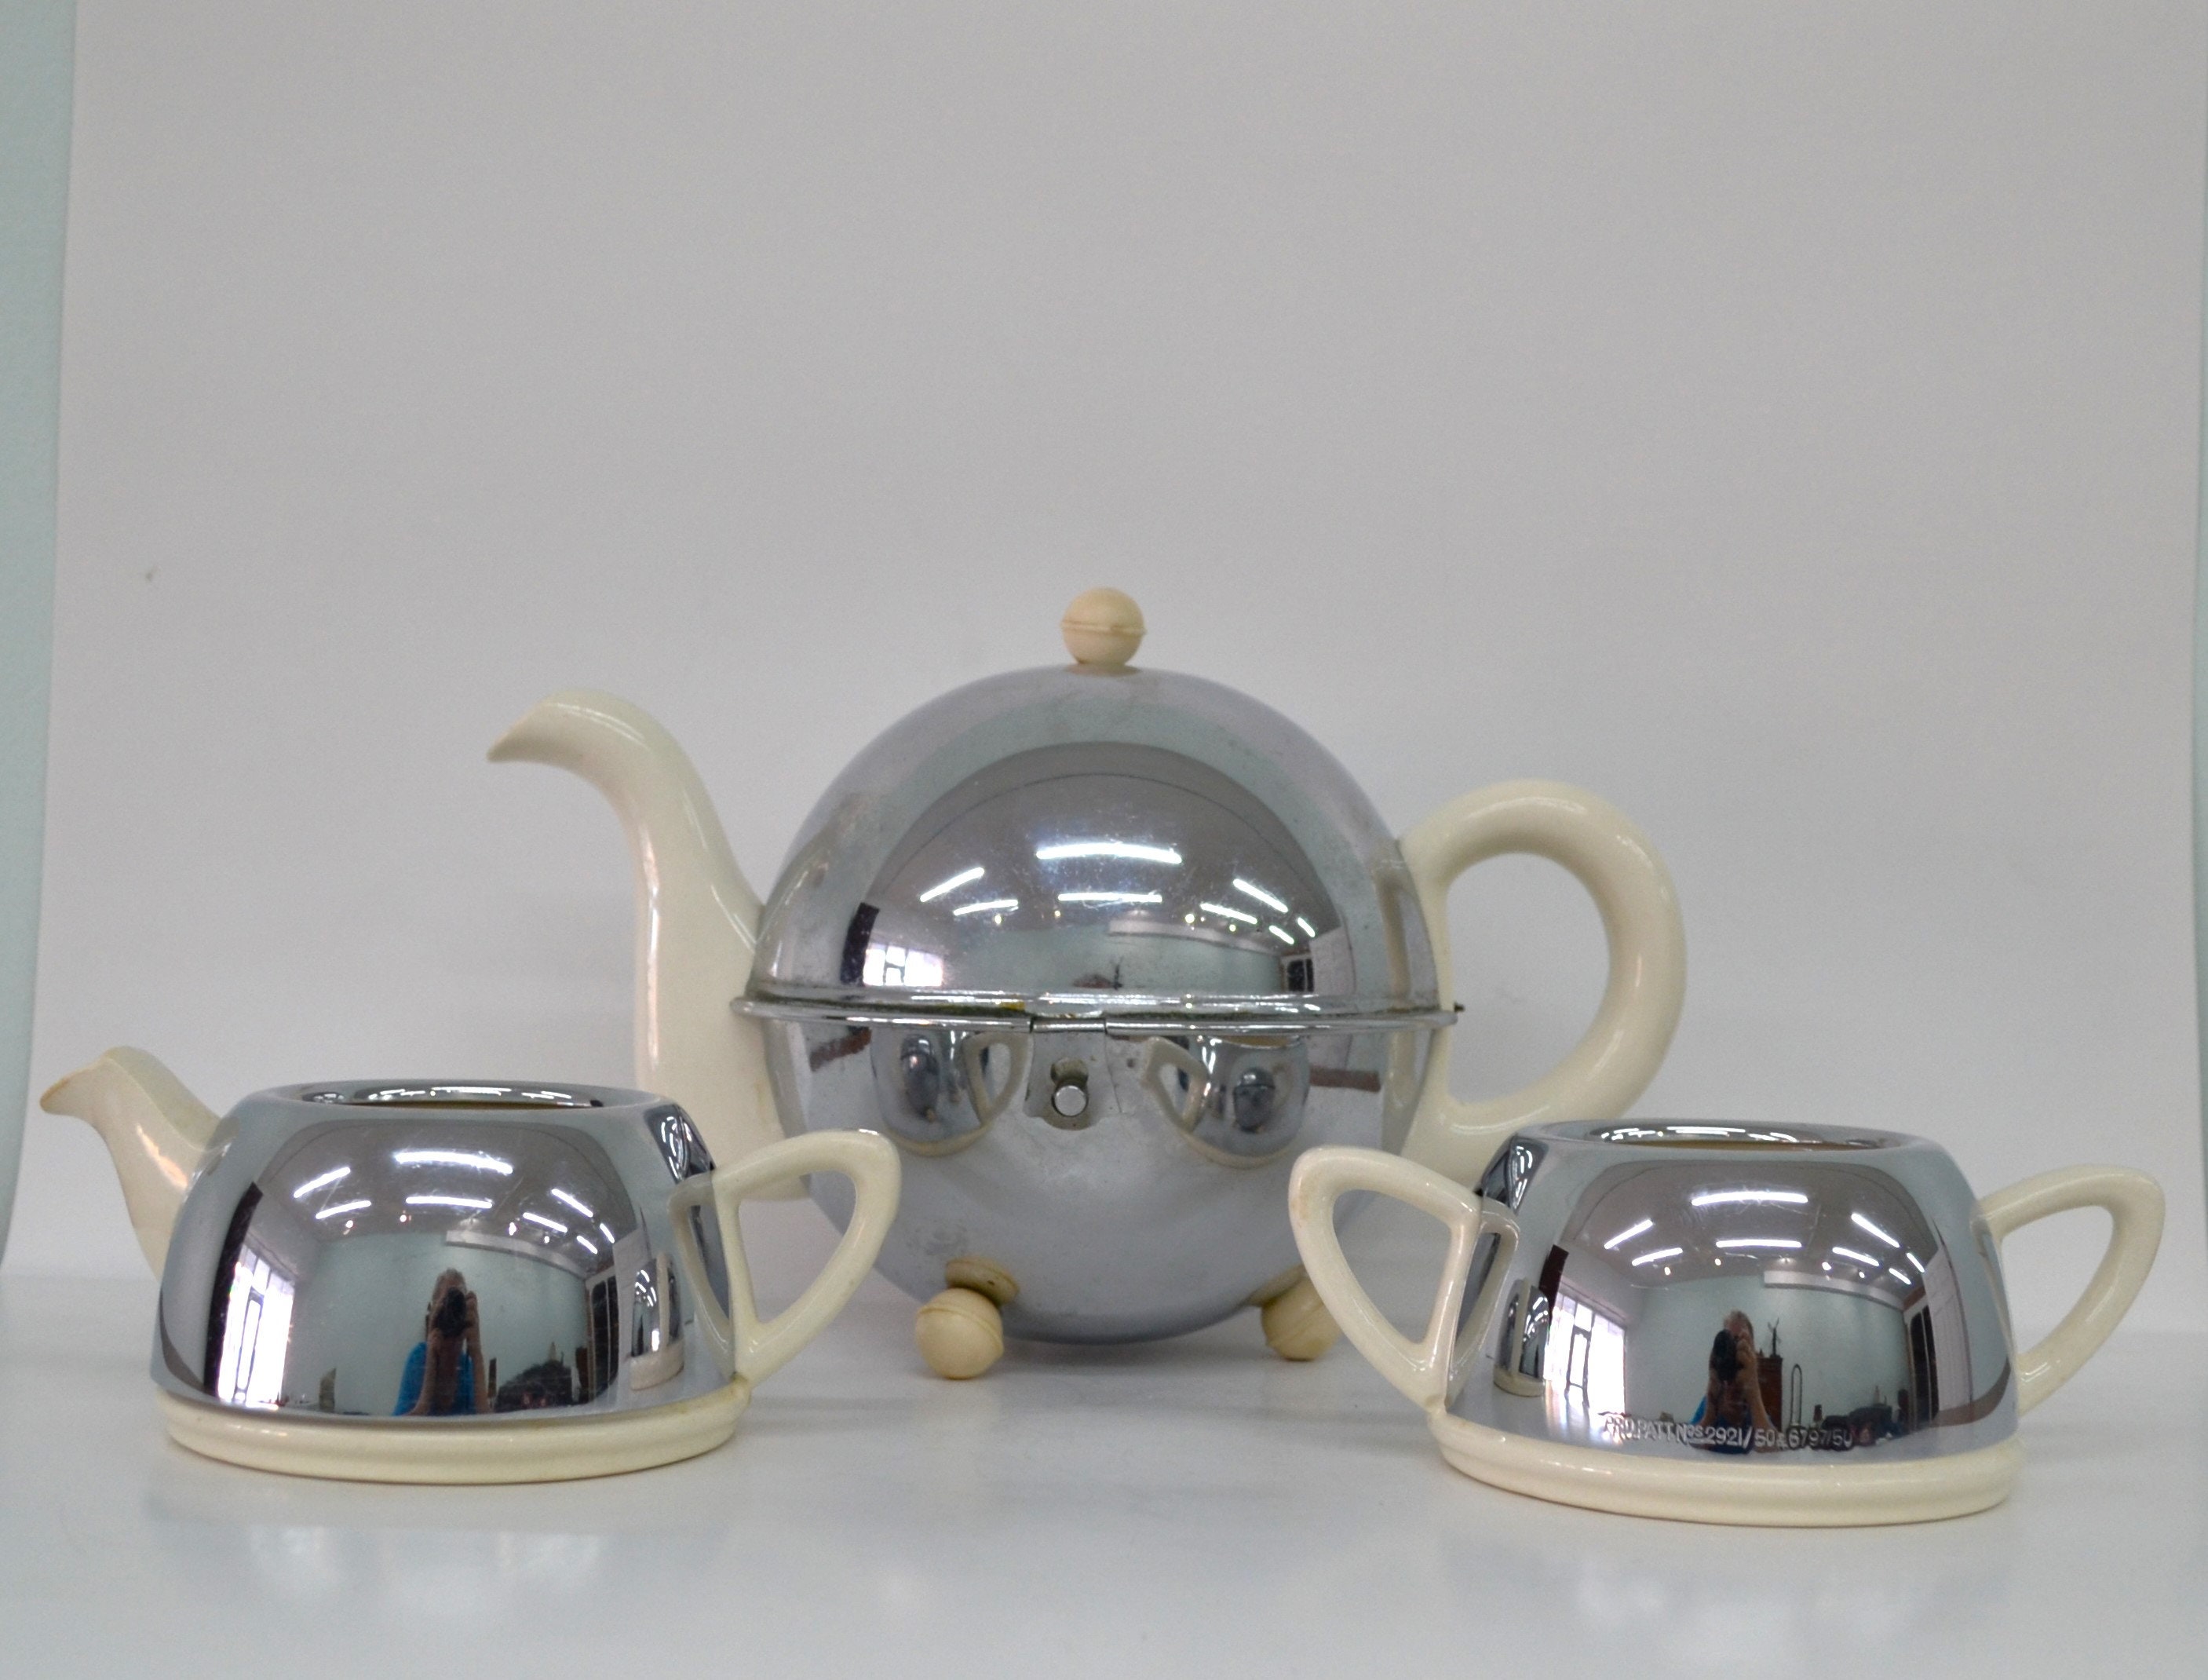 1990s unused with labels Hans Slany design insulated thermal teapot.  Galileo by Leifheit Germany - Memphis style